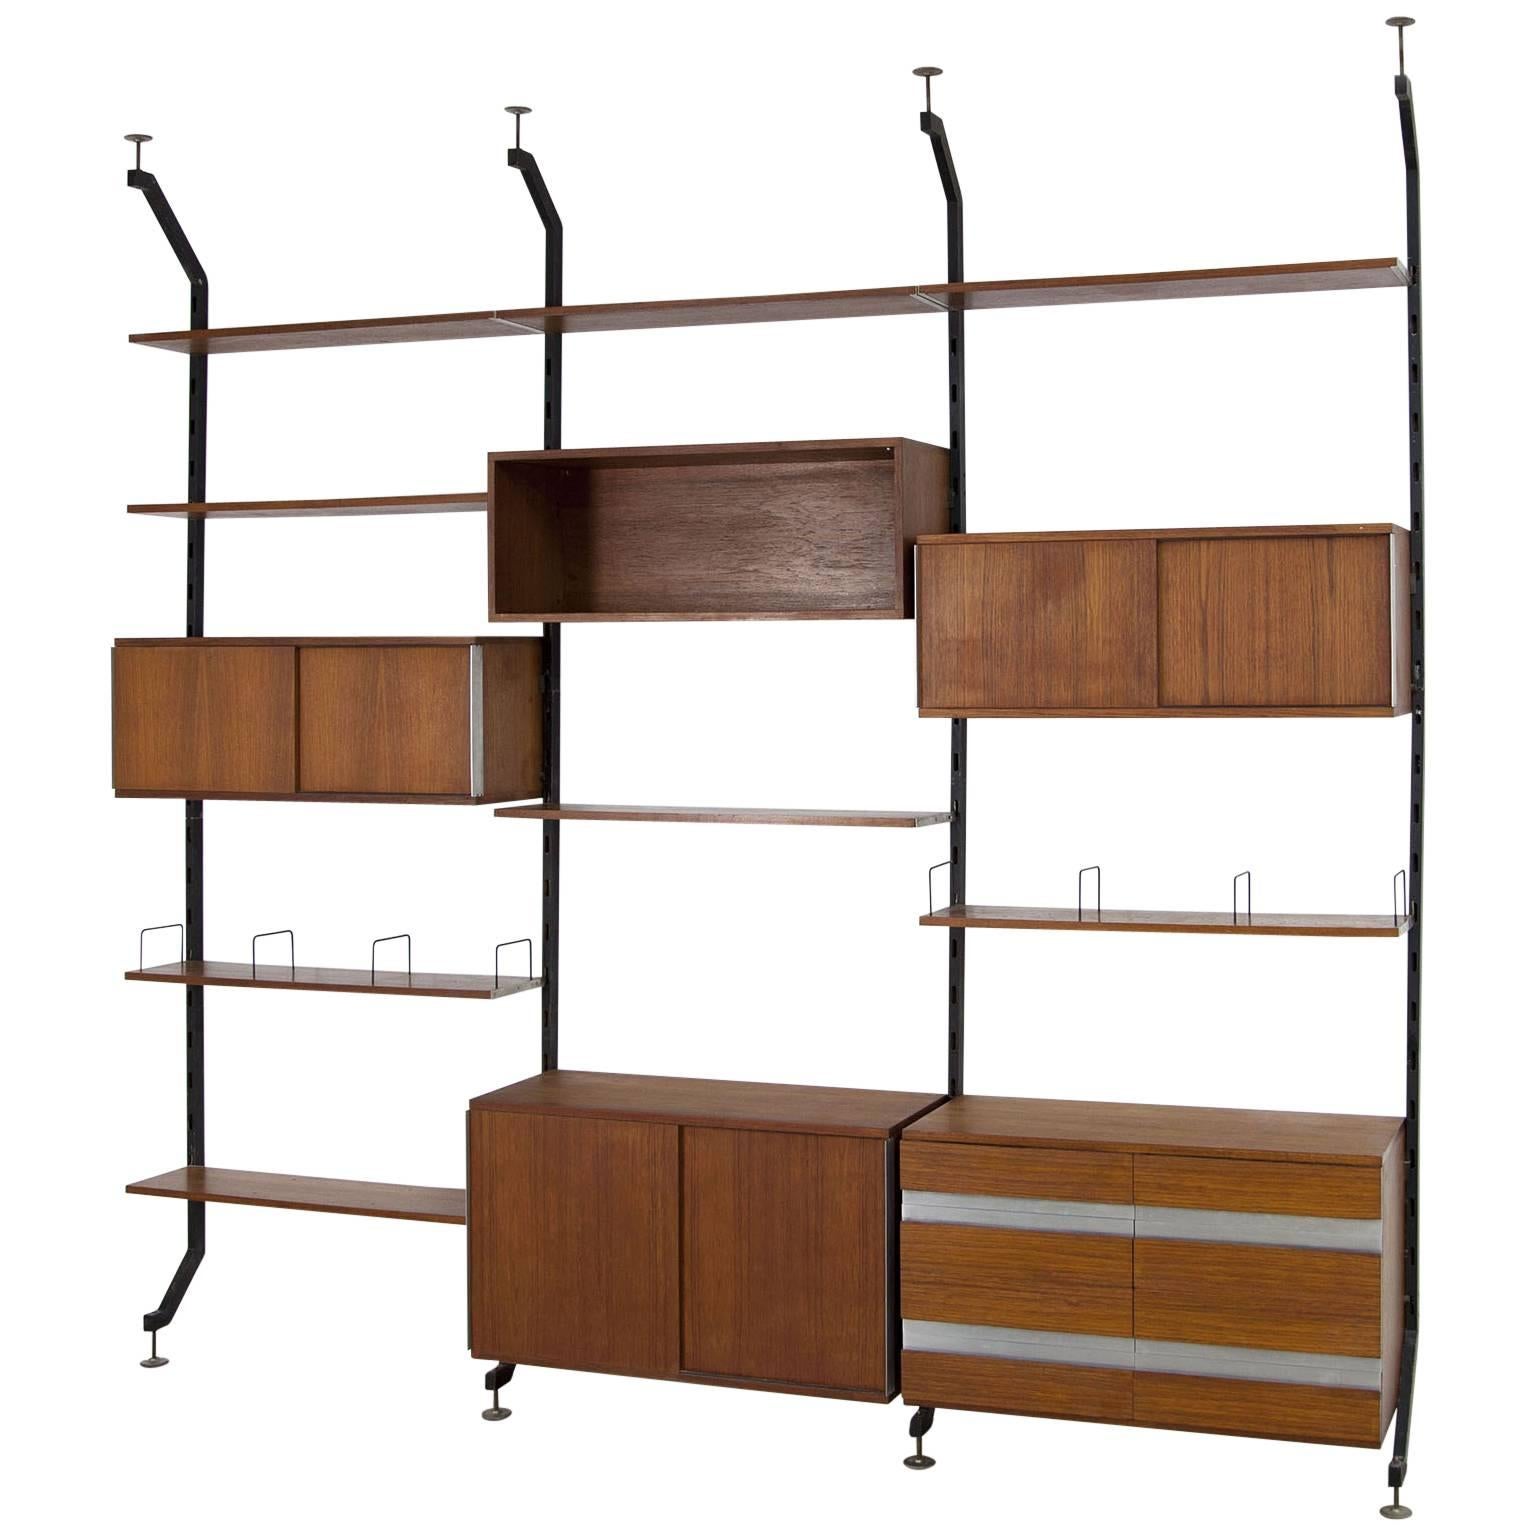 Teak Wall-Unit by Ico Parisi for Mim Roma Model Urio For Sale